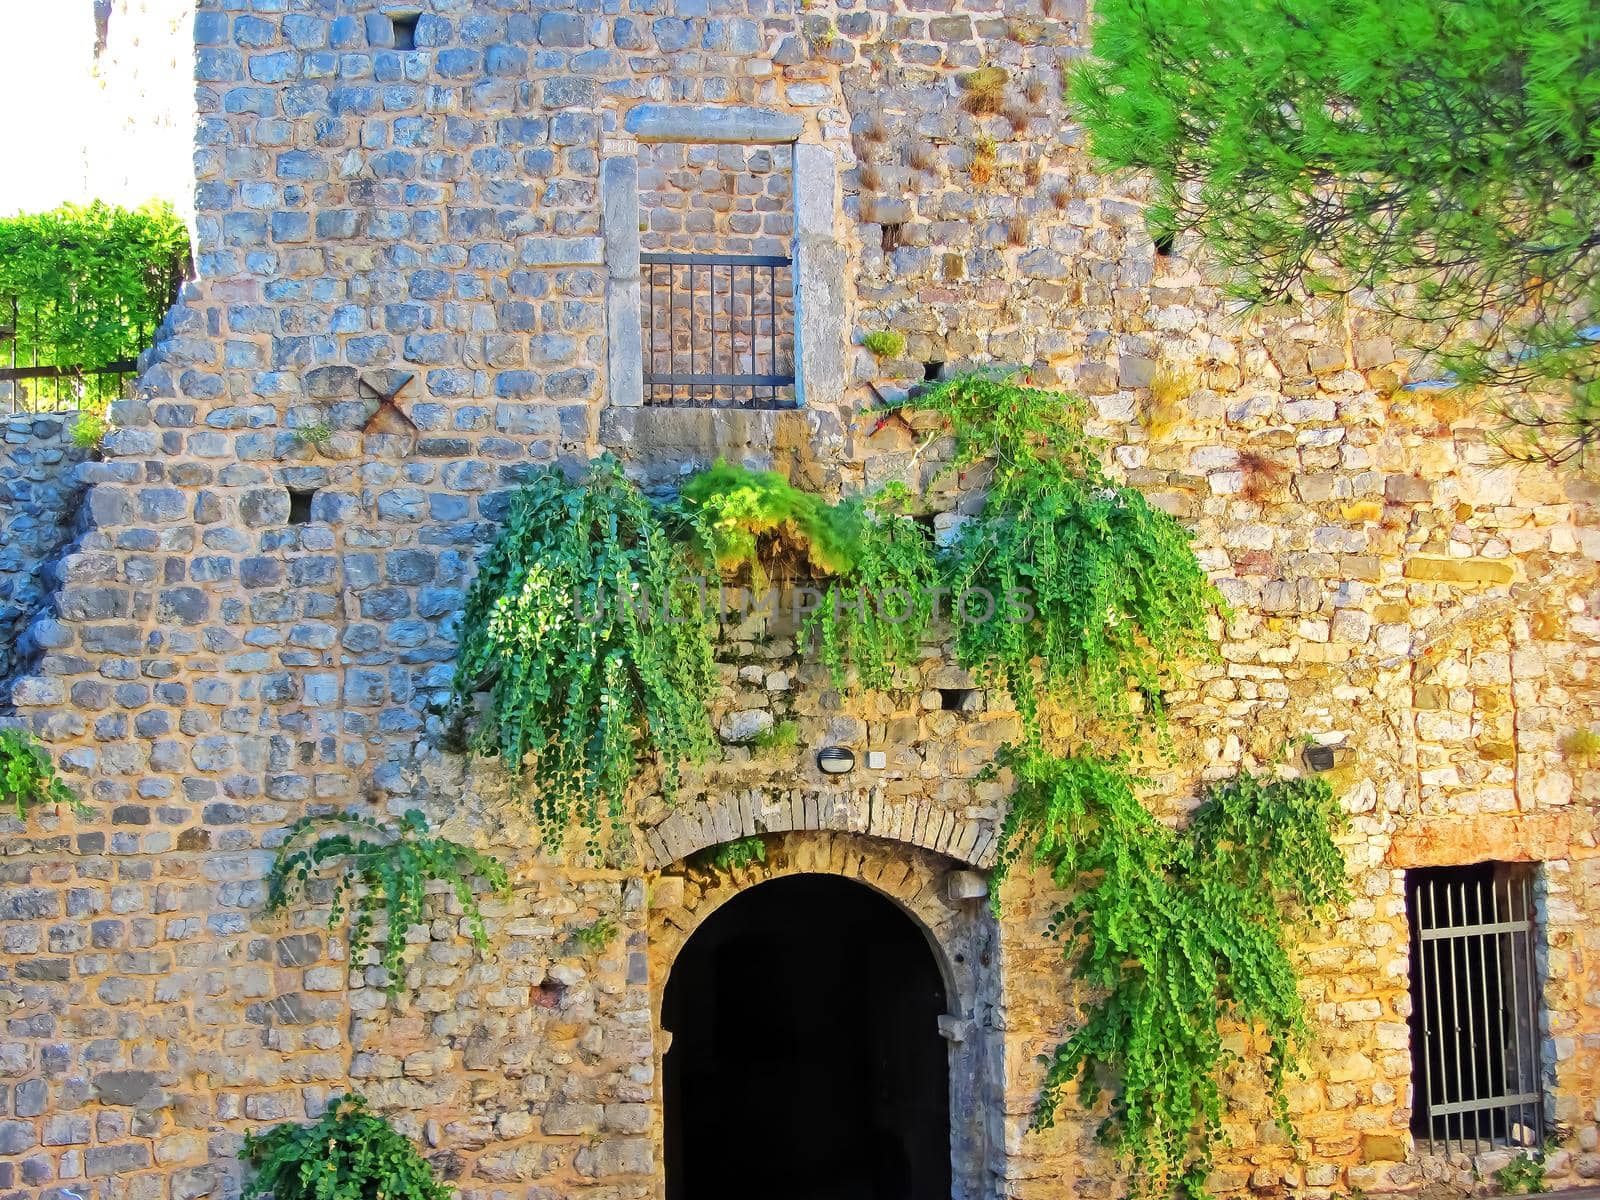 Green vegetation on the wall of an ancient European castle. Shrubs on the stone wall with the gate to the castle. Detail of castle ruins with window and lattice by mr-tigga